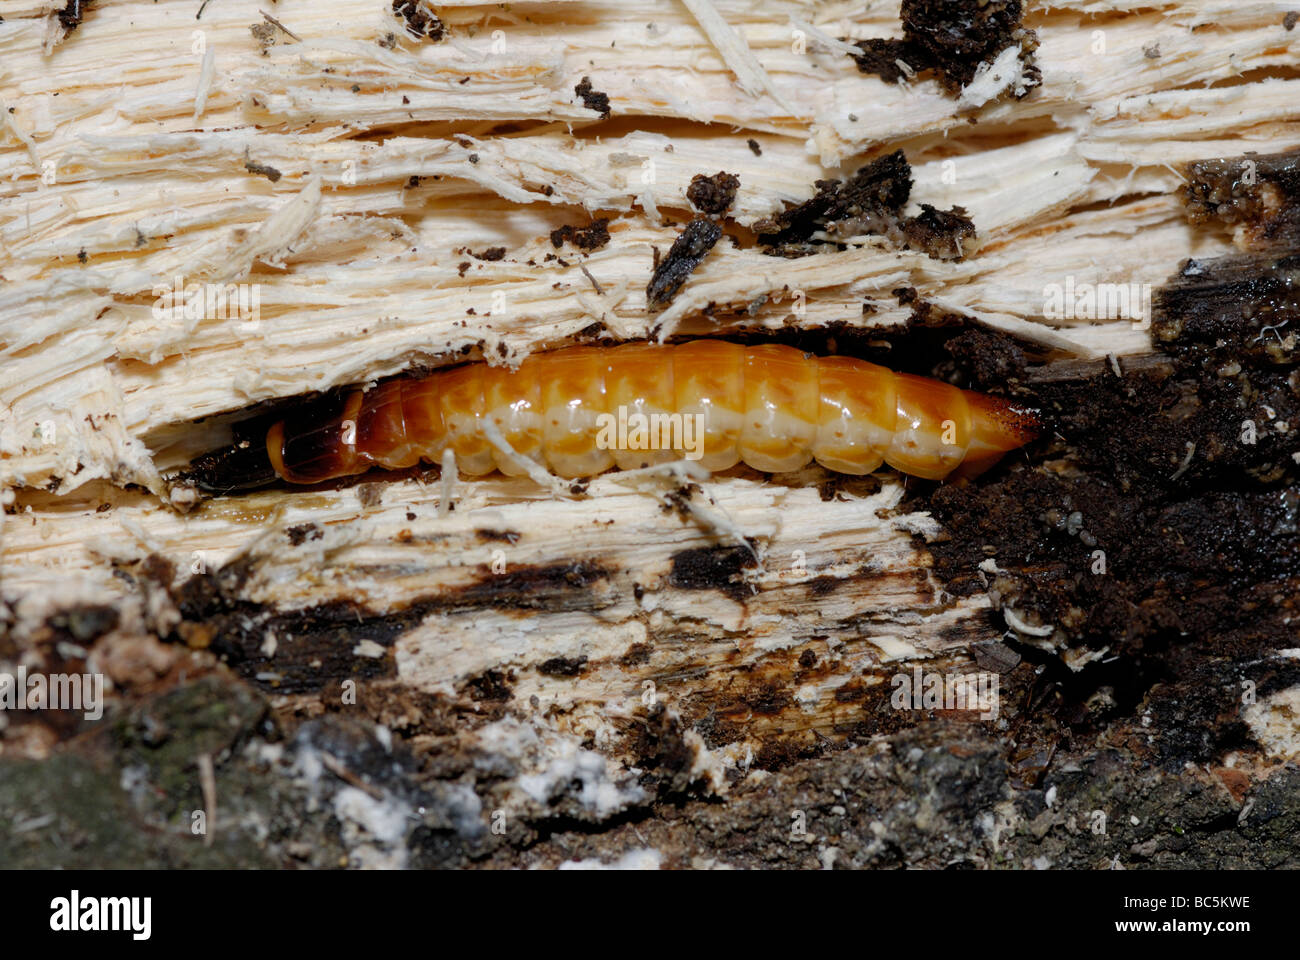 Larva of a click beetle, family Elateridae. Click beetle larvae are also known as wireworms. Stock Photo